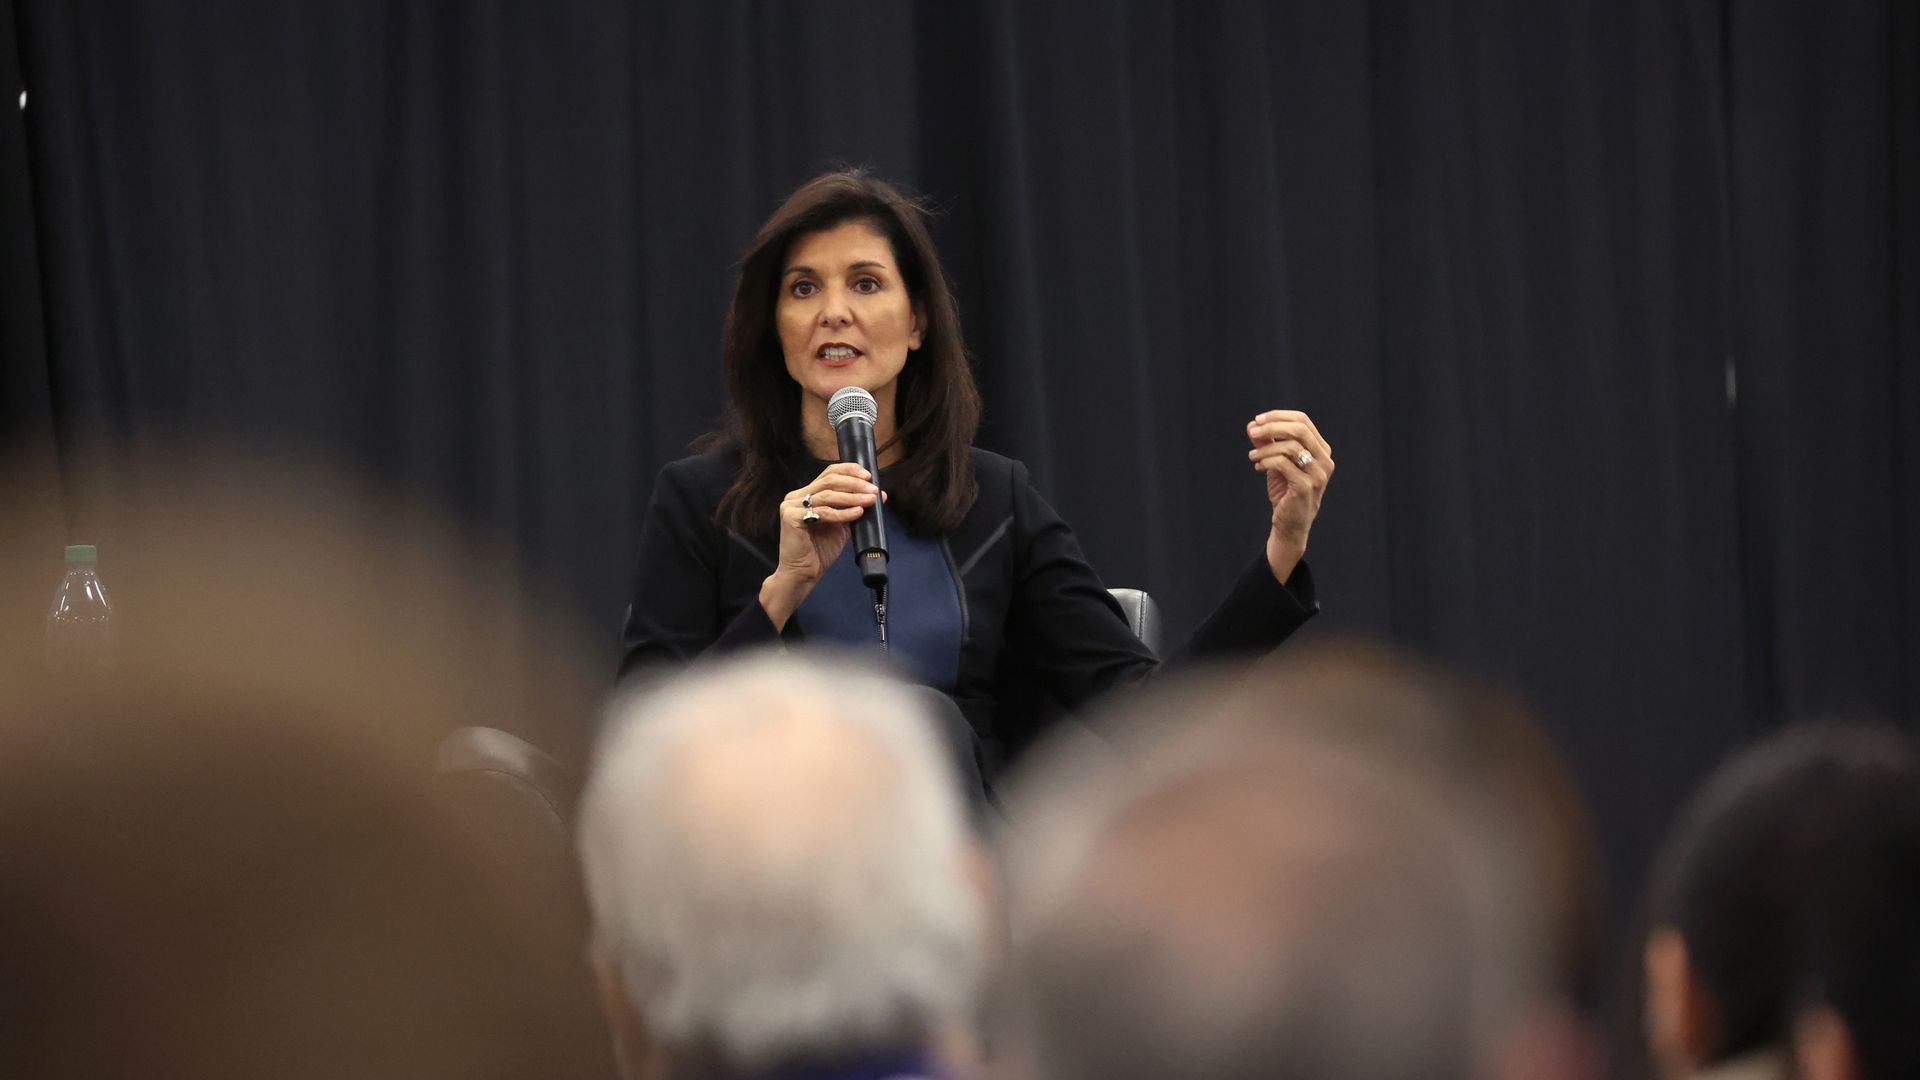  Republican presidential candidate and former UN Ambassador Nikki Haley participates in a conversation with Senator Joni Ernst (R-IA) hosted by the Bastion Institute on March 10, 2023 in Clive, Iowa